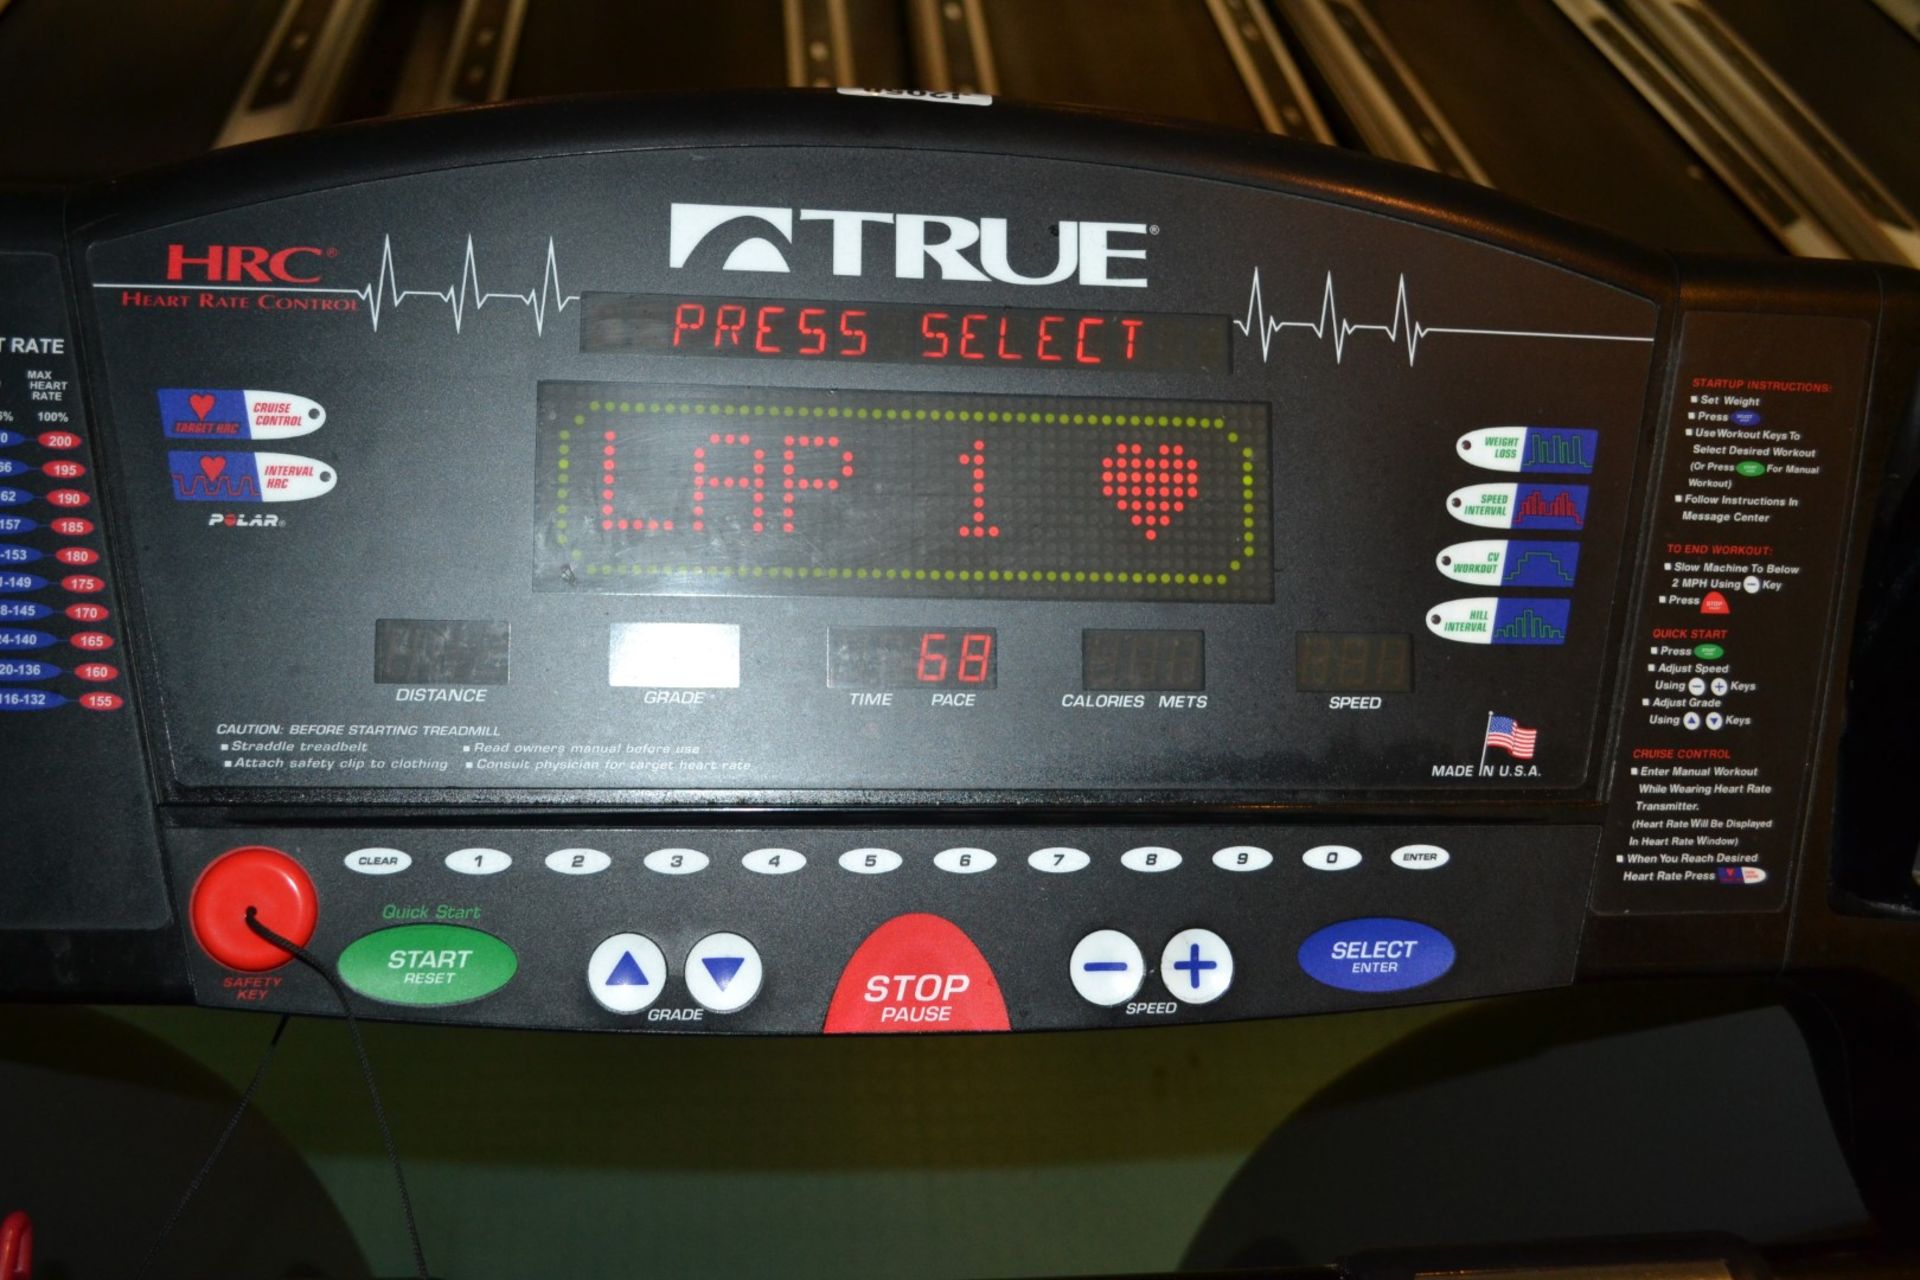 1 x True Fitness Commercial Treadmill With Heart Rate Control - Dimensions:L200 x W85 x H150cm - - Image 3 of 3